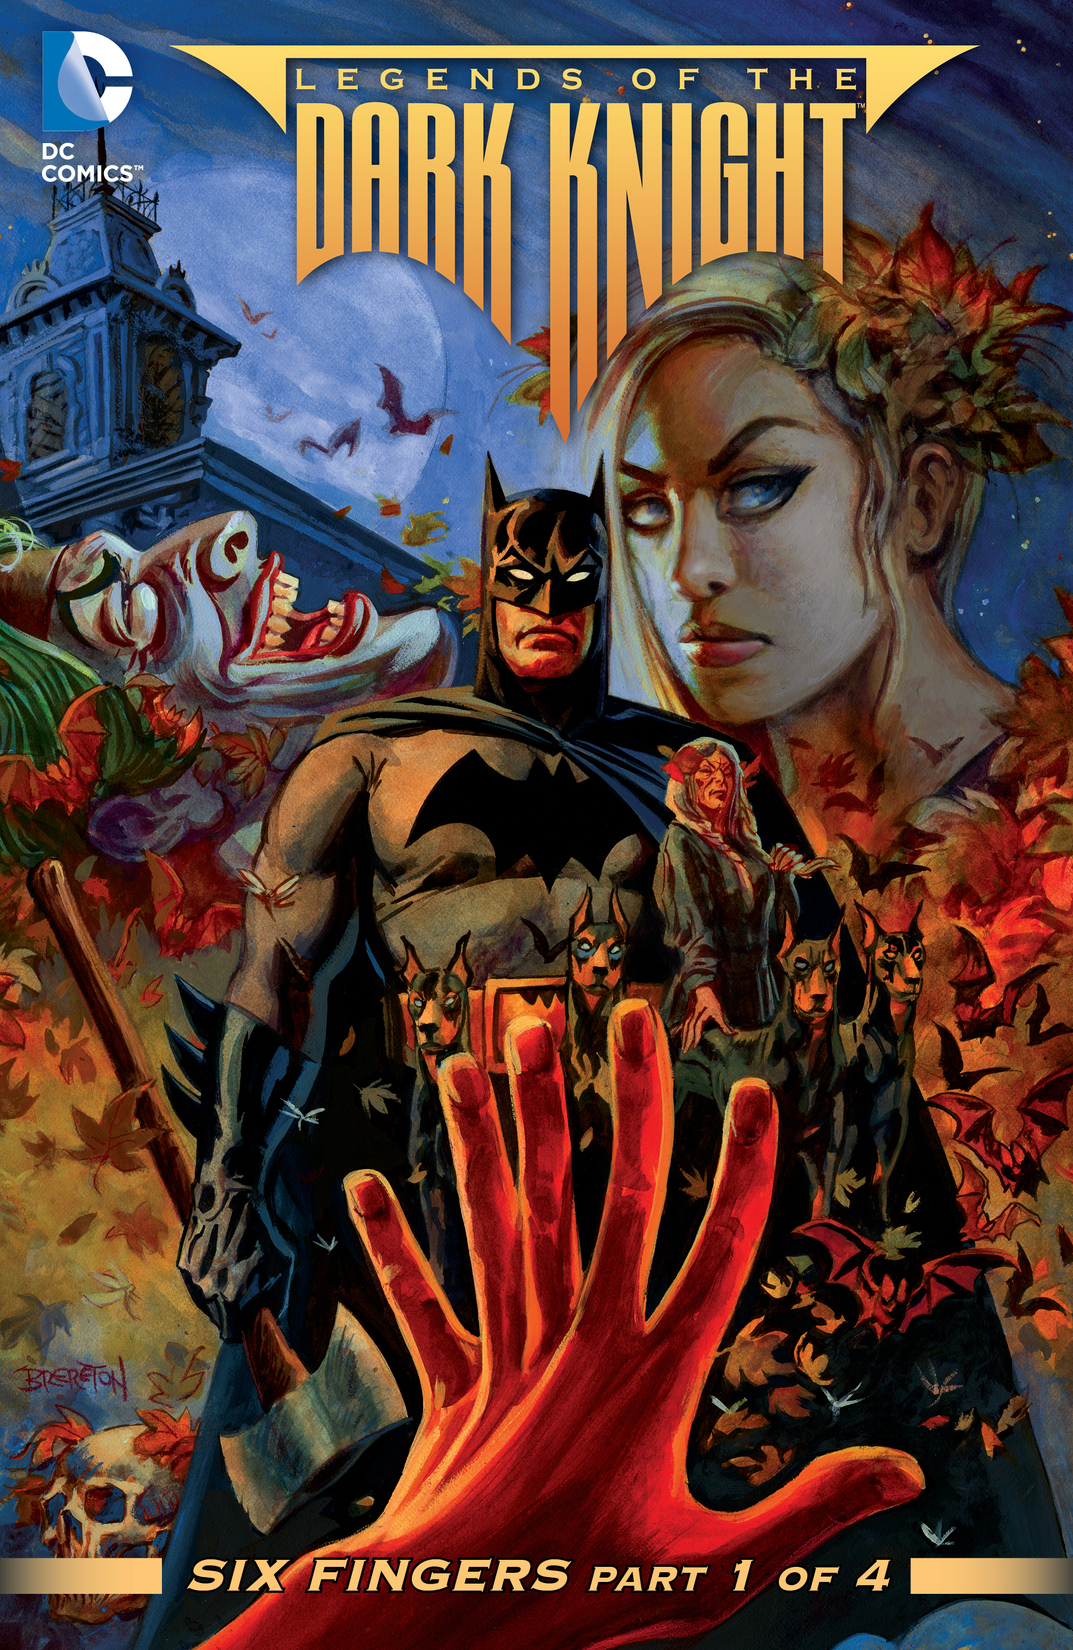 Legends of the Dark Knight #85 preview images